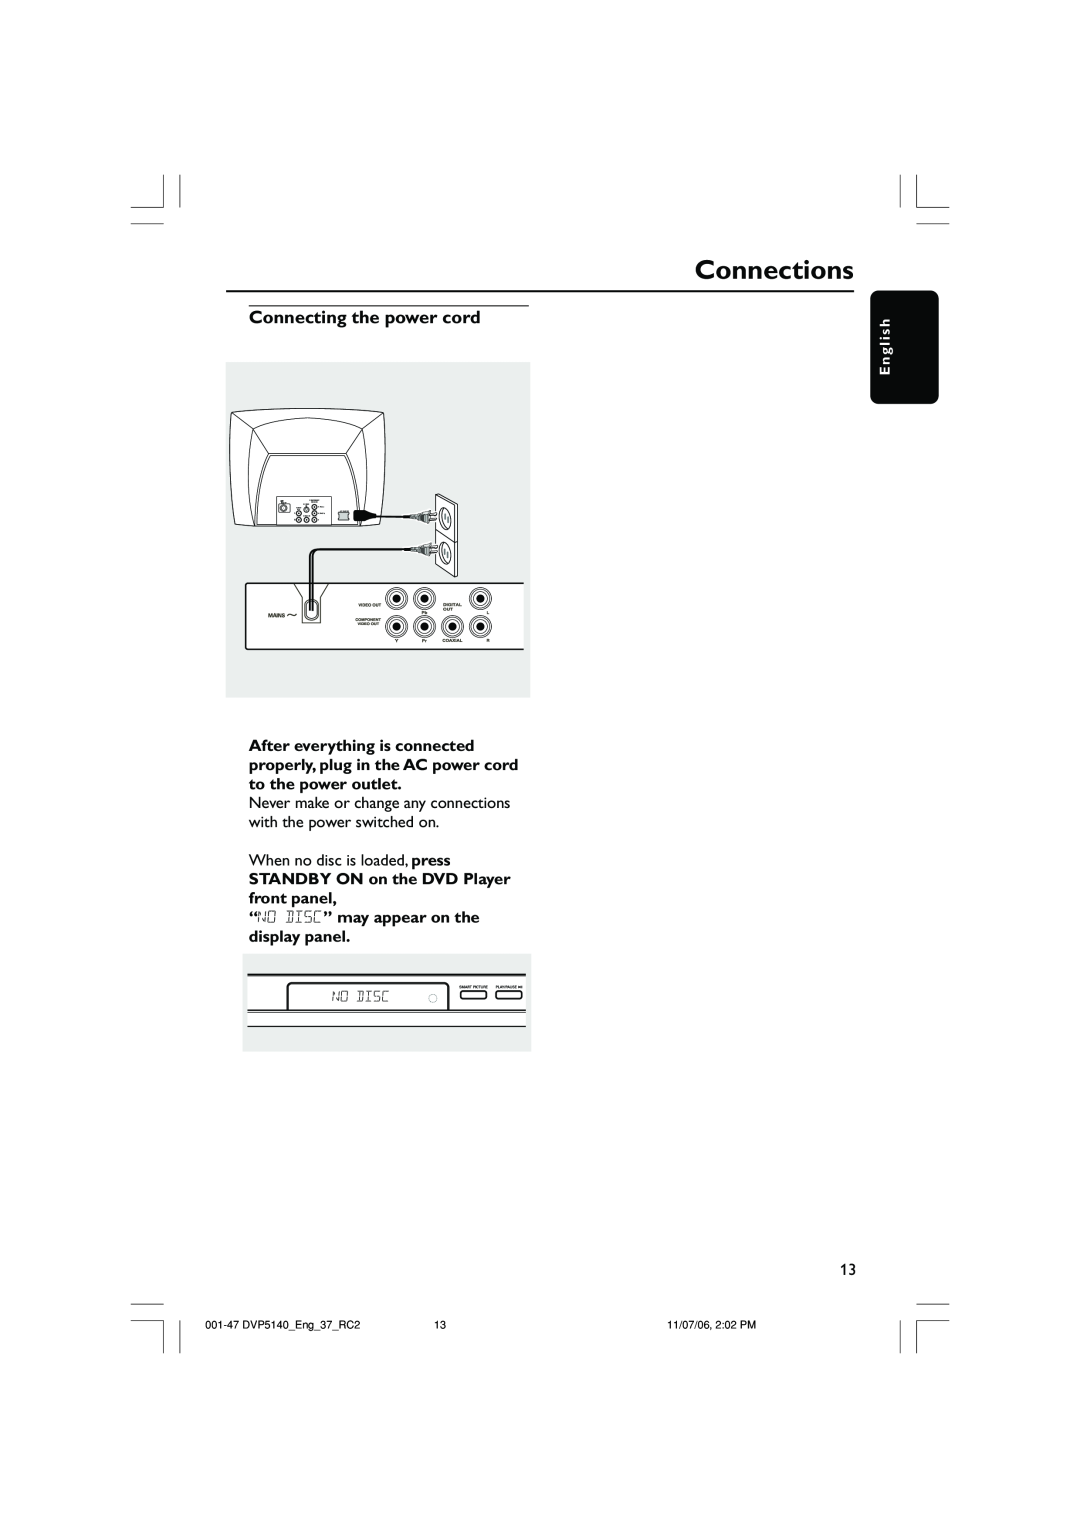 Philips DVP5140 user manual Connecting the power cord, Connections, STANDBY ON on the DVD Player front panel, E n g l i s h 